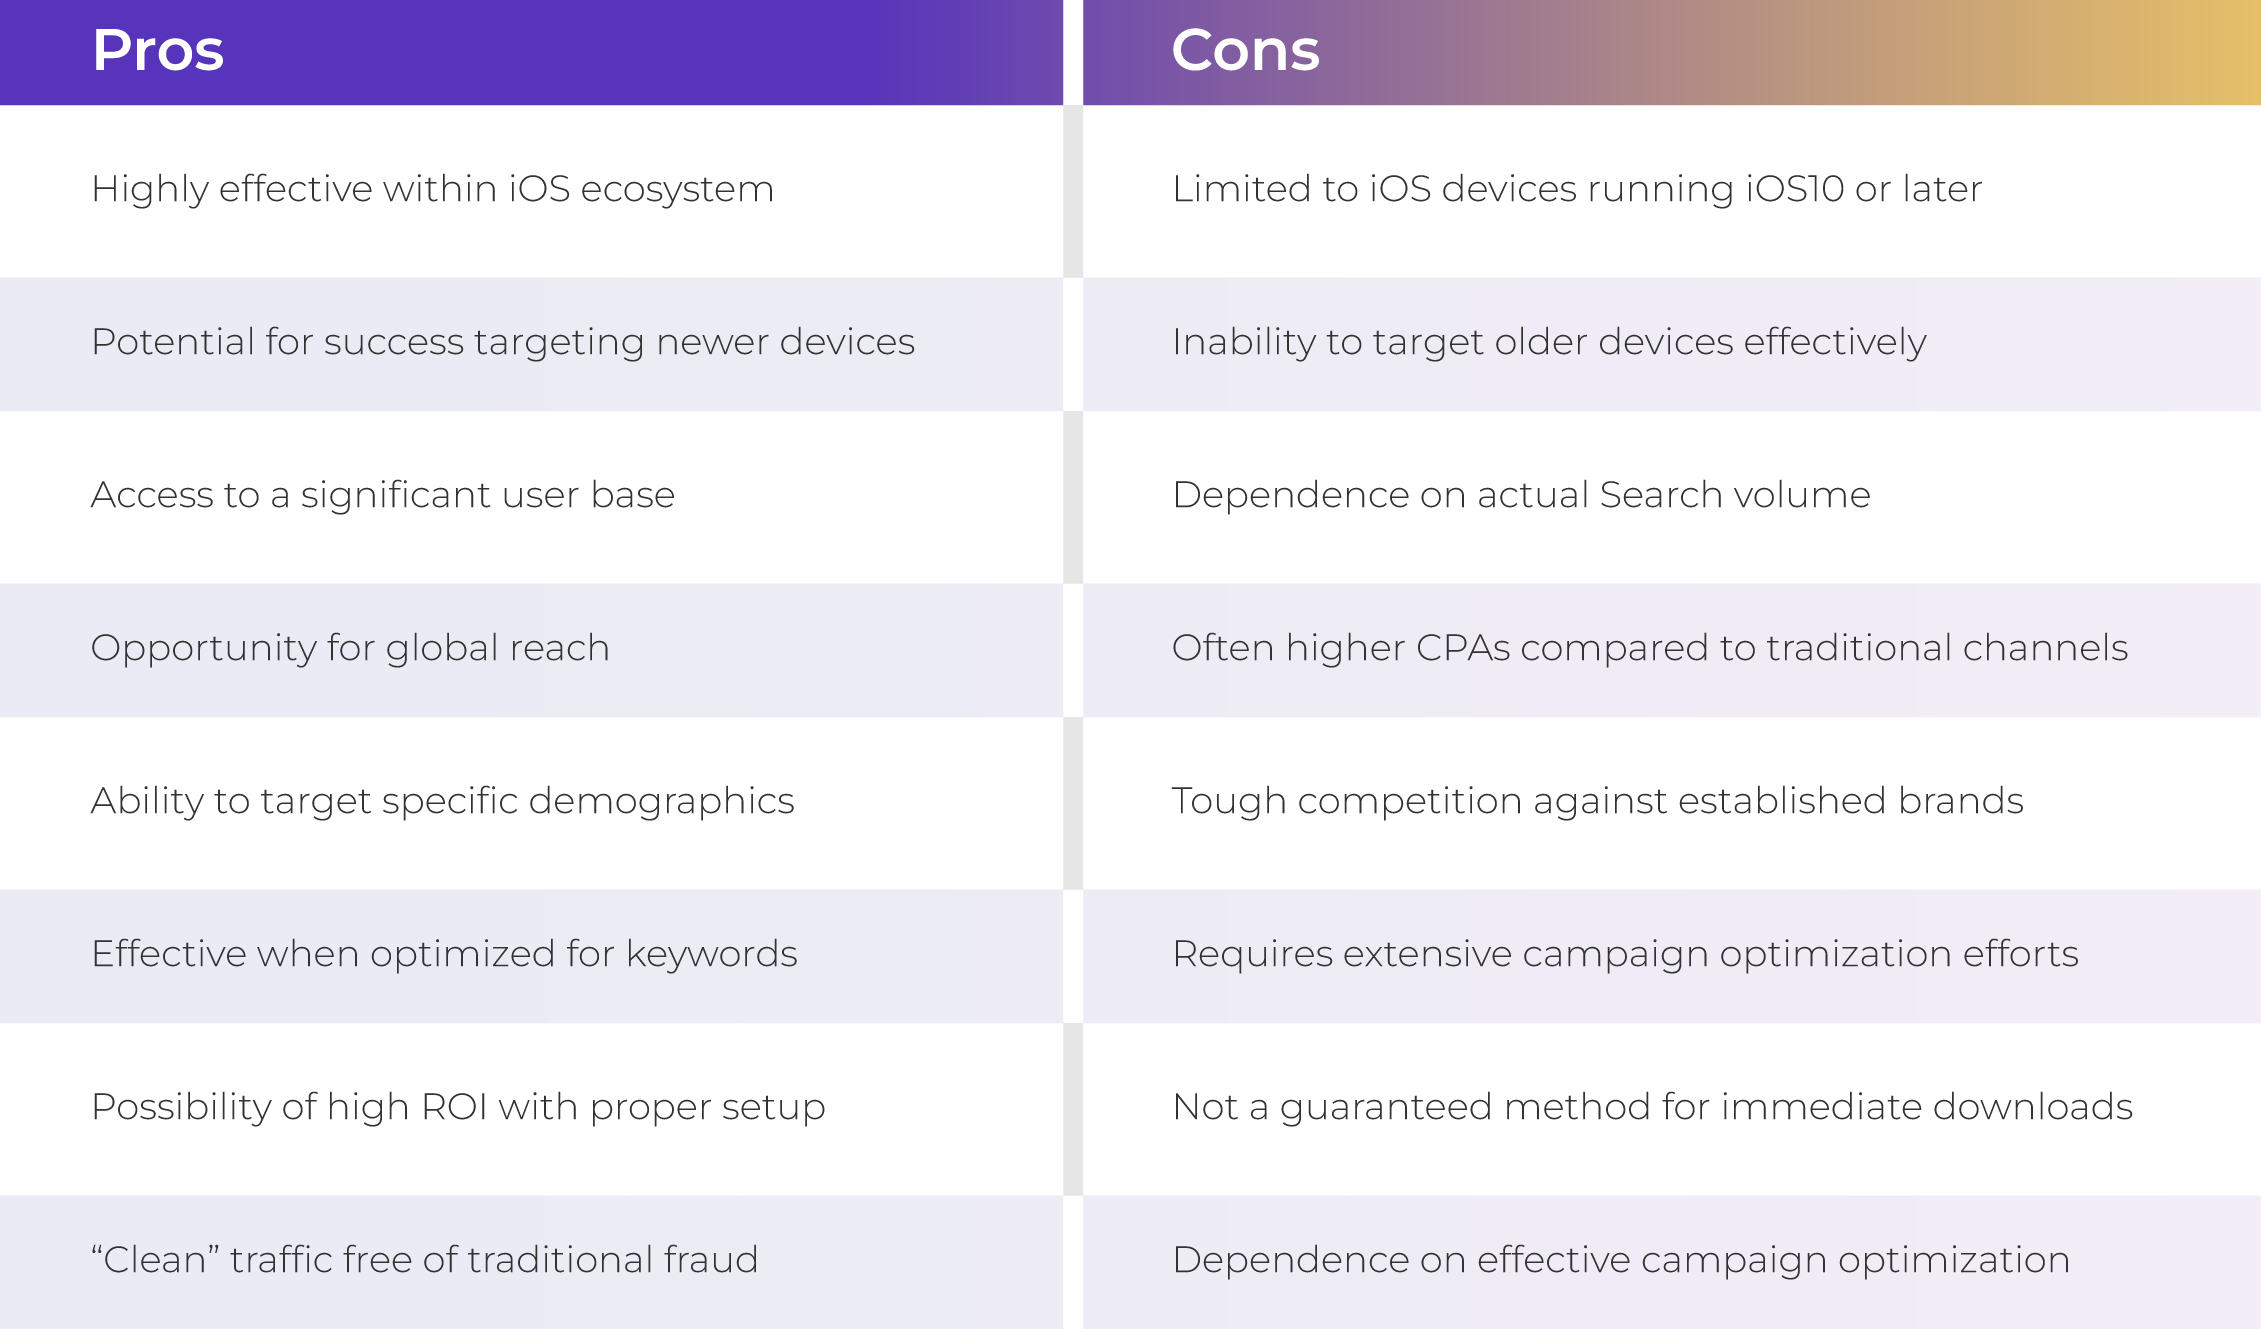 A table comparing the pros and cons of a specific marketing strategy. The left column lists the pros, including being highly effective within the iOS ecosystem, access to a significant user base, global reach, demographic targeting, keyword optimization effectiveness, potential for high ROI, and clean traffic. The right column lists the cons, such as limitations to iOS devices running iOS 10 or later, inability to target older devices, dependence on search volume, higher cost per acquisition, tough competition, extensive campaign optimization requirements, and no guarantee for immediate downloads